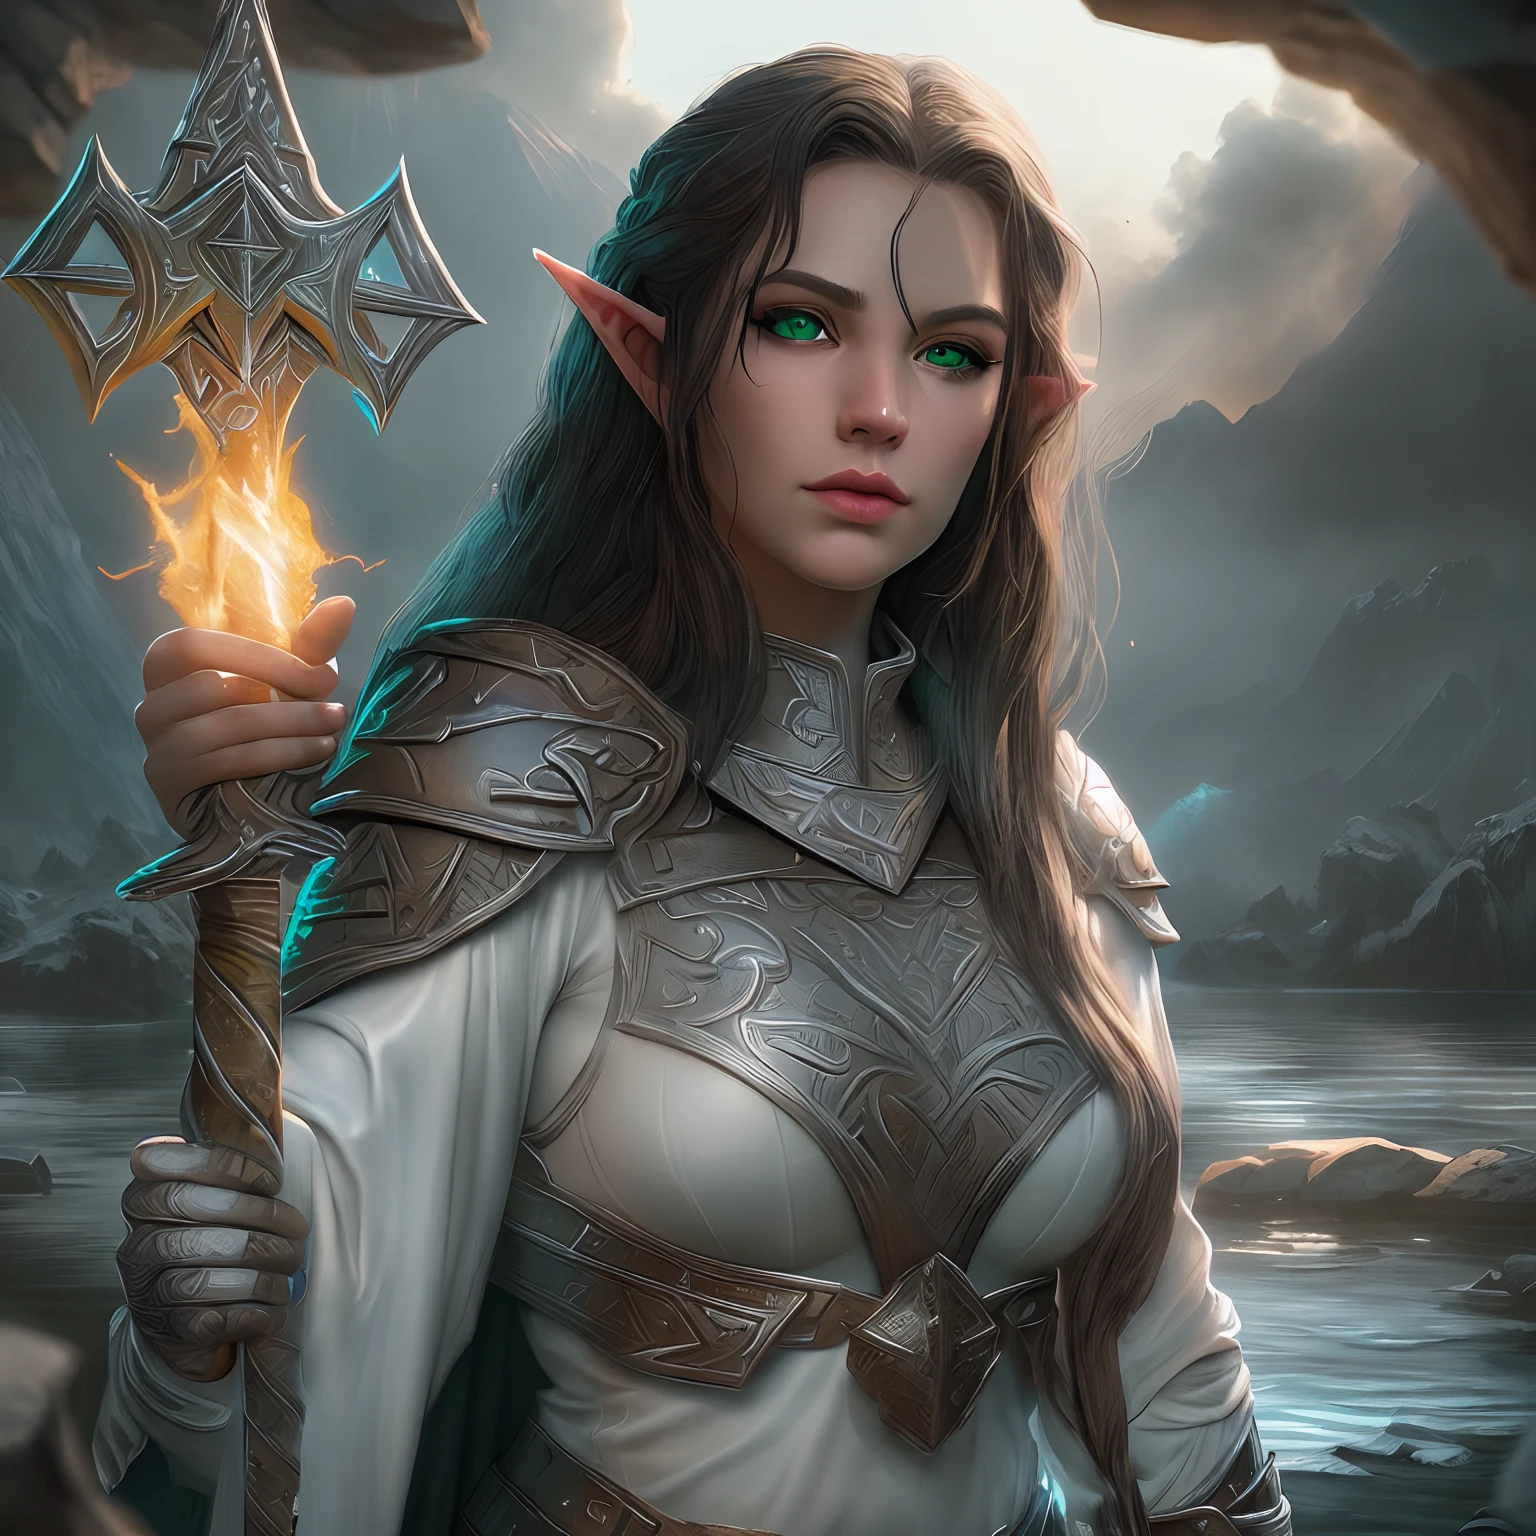 arafed, high details, best quality, 8k, [ultra detailed], masterpiece, best quality, (extremely detailed), dynamic angle, ultra wide shot, RAW, photorealistic, fantasy art, d&d art, a wide angle picture of a half elf cleric in  a temple near the lake, female, half elf (Masterpiece 1.5, intense details), black haired, green eyes, braided hair, long hair (Masterpiece, intense details), [small pointed ears], cleric, templar (1.3 Masterpiece, intense details dnd art), ultra detailed face, casting a spell (1.4 Masterpiece, intense details dnd art), wearing white plate mail armor with sigils ( 1.5 Masterpiece, intense details) GlowingRunes_paleblue, carrying flaming sword (Masterpiece 1.5, intense details), wearing white cloak with sigils (Masterpiece 1.4, intense details), holy symbol, standing near a lake (Masterpiece 1.5, intense details), dawn light, backlight, dynamic angle, reflection (1.5 Masterpiece, intense details) glowing light, high details , ray tracing, reflection light, silhouette, wide shot, panorama, Ultra-Wide Angle, high detail, award winning, best quality, HD, 8K, 3D rendering, high details, best quality, highres, ultra wide angle, 3D rendering, [[anatomically correct]]